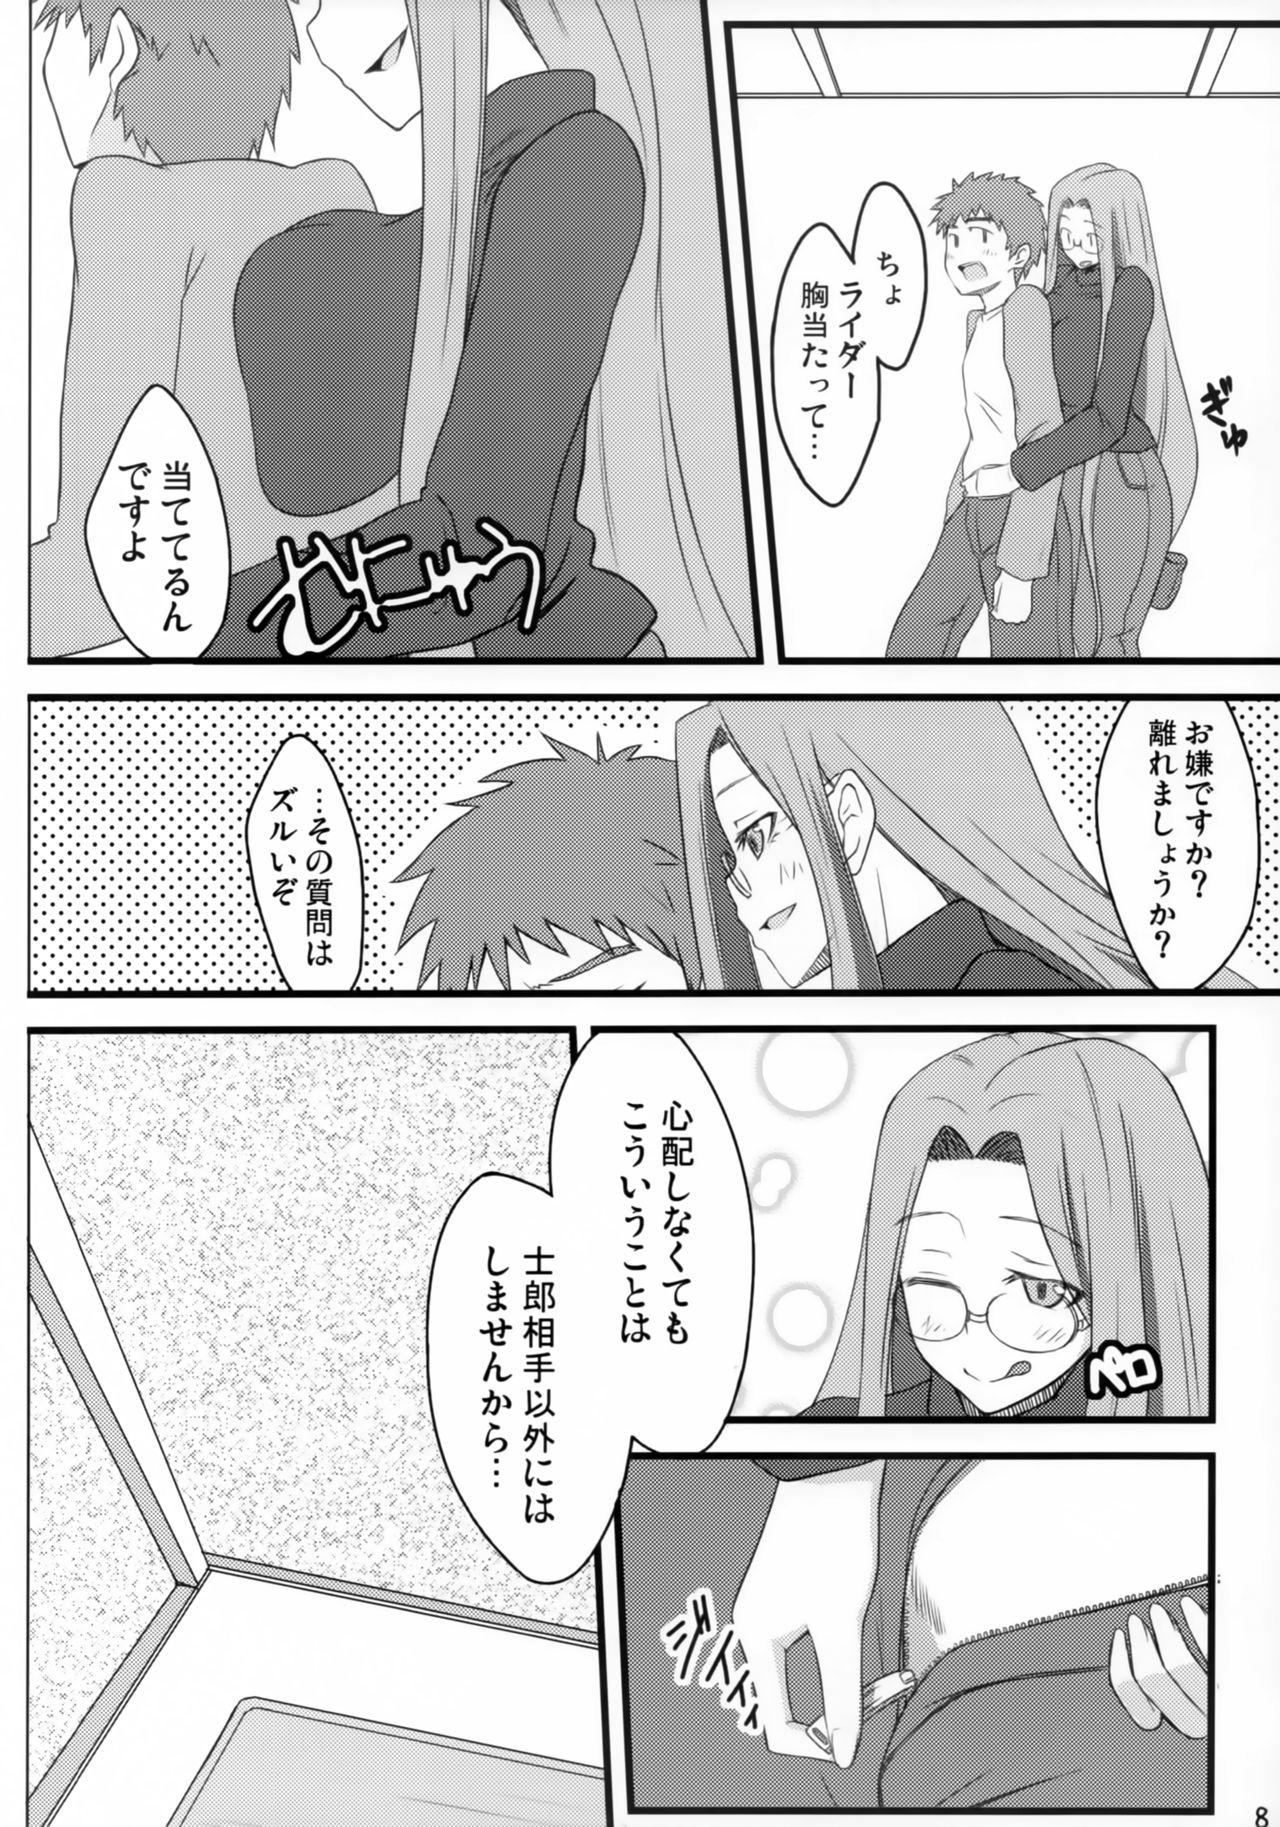 4some R4 - Fate stay night Boy - Page 7